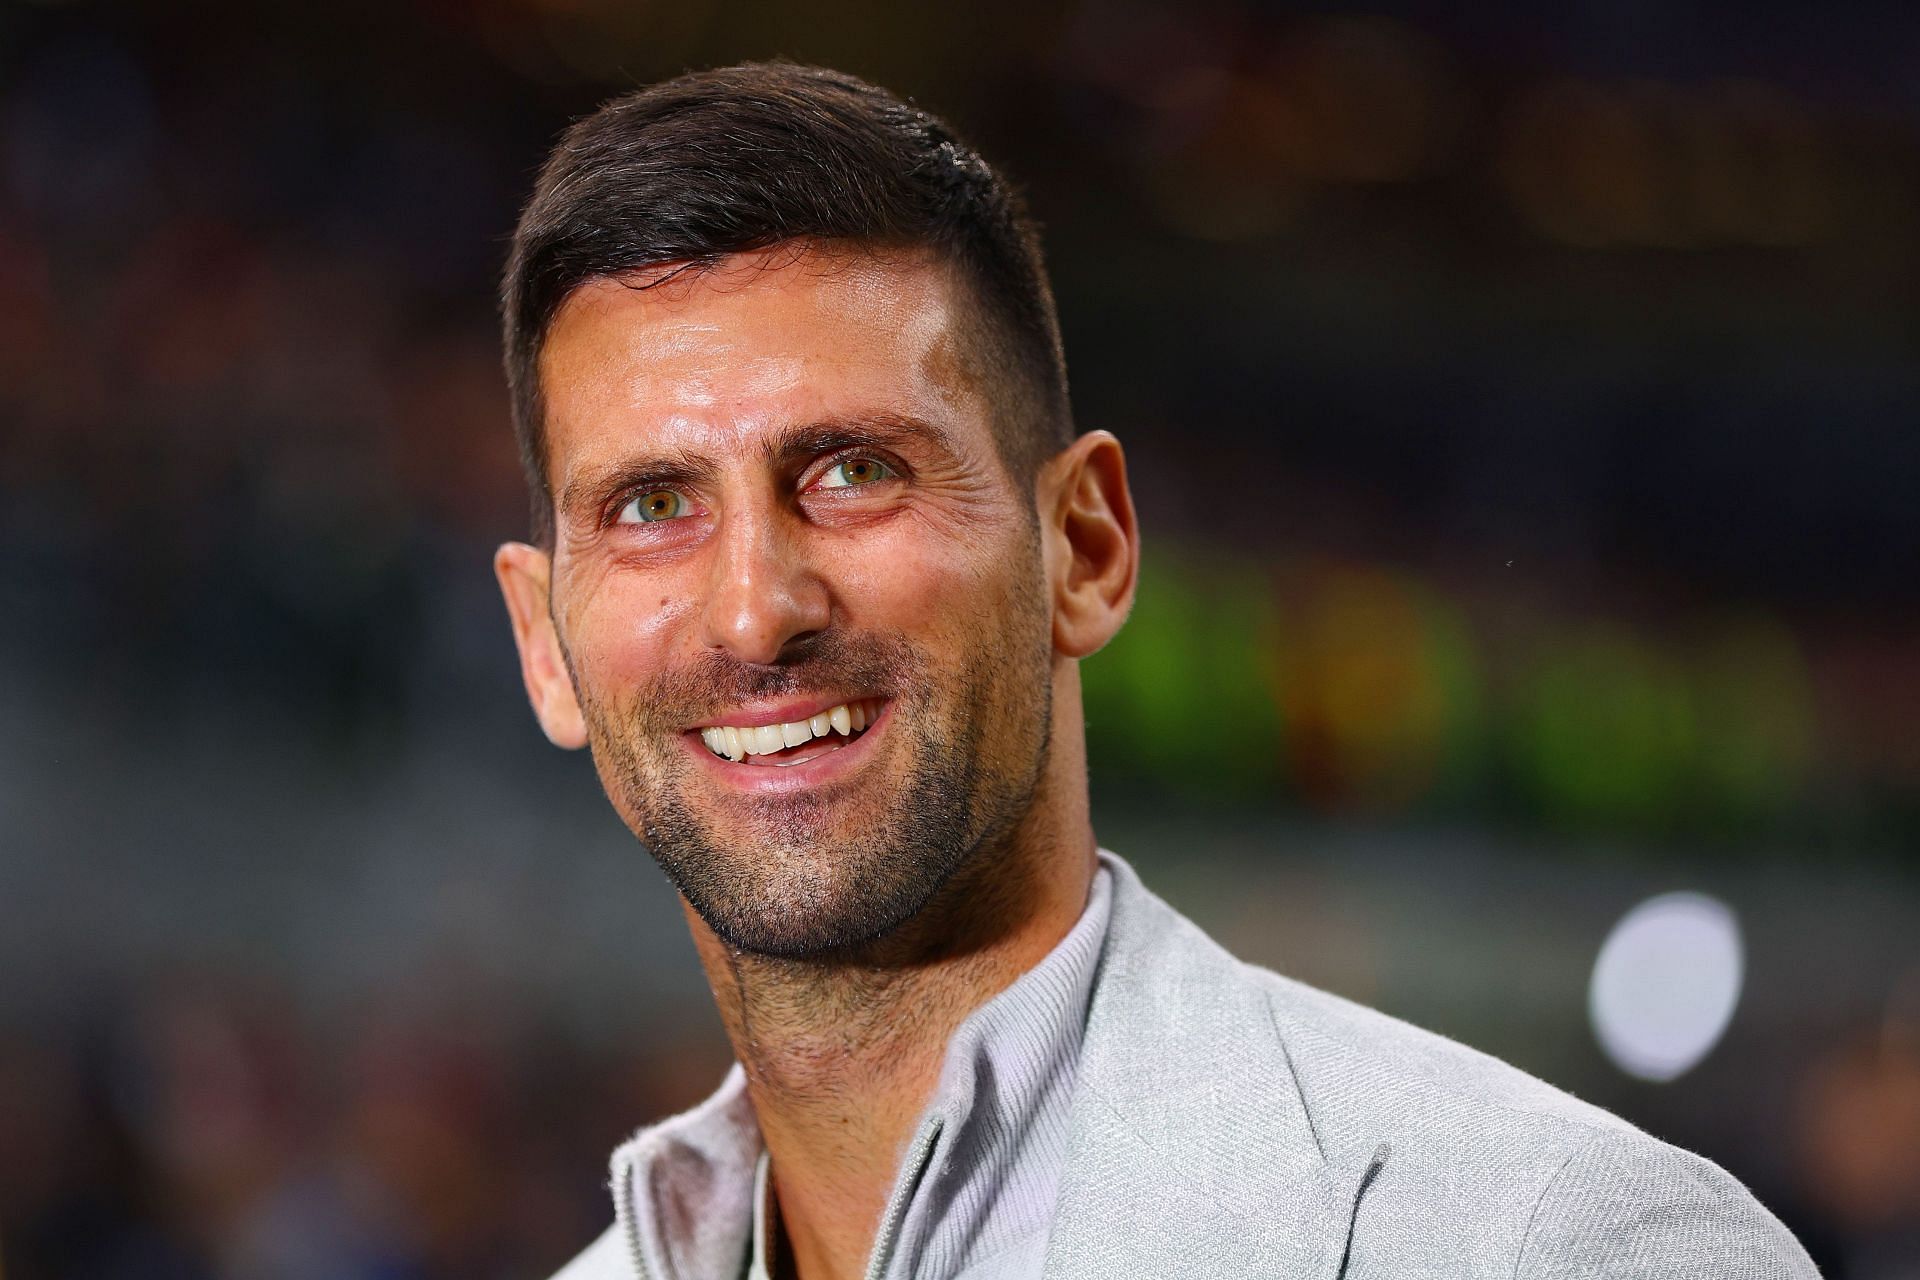 Novak Djokovic opens up about his life and choices